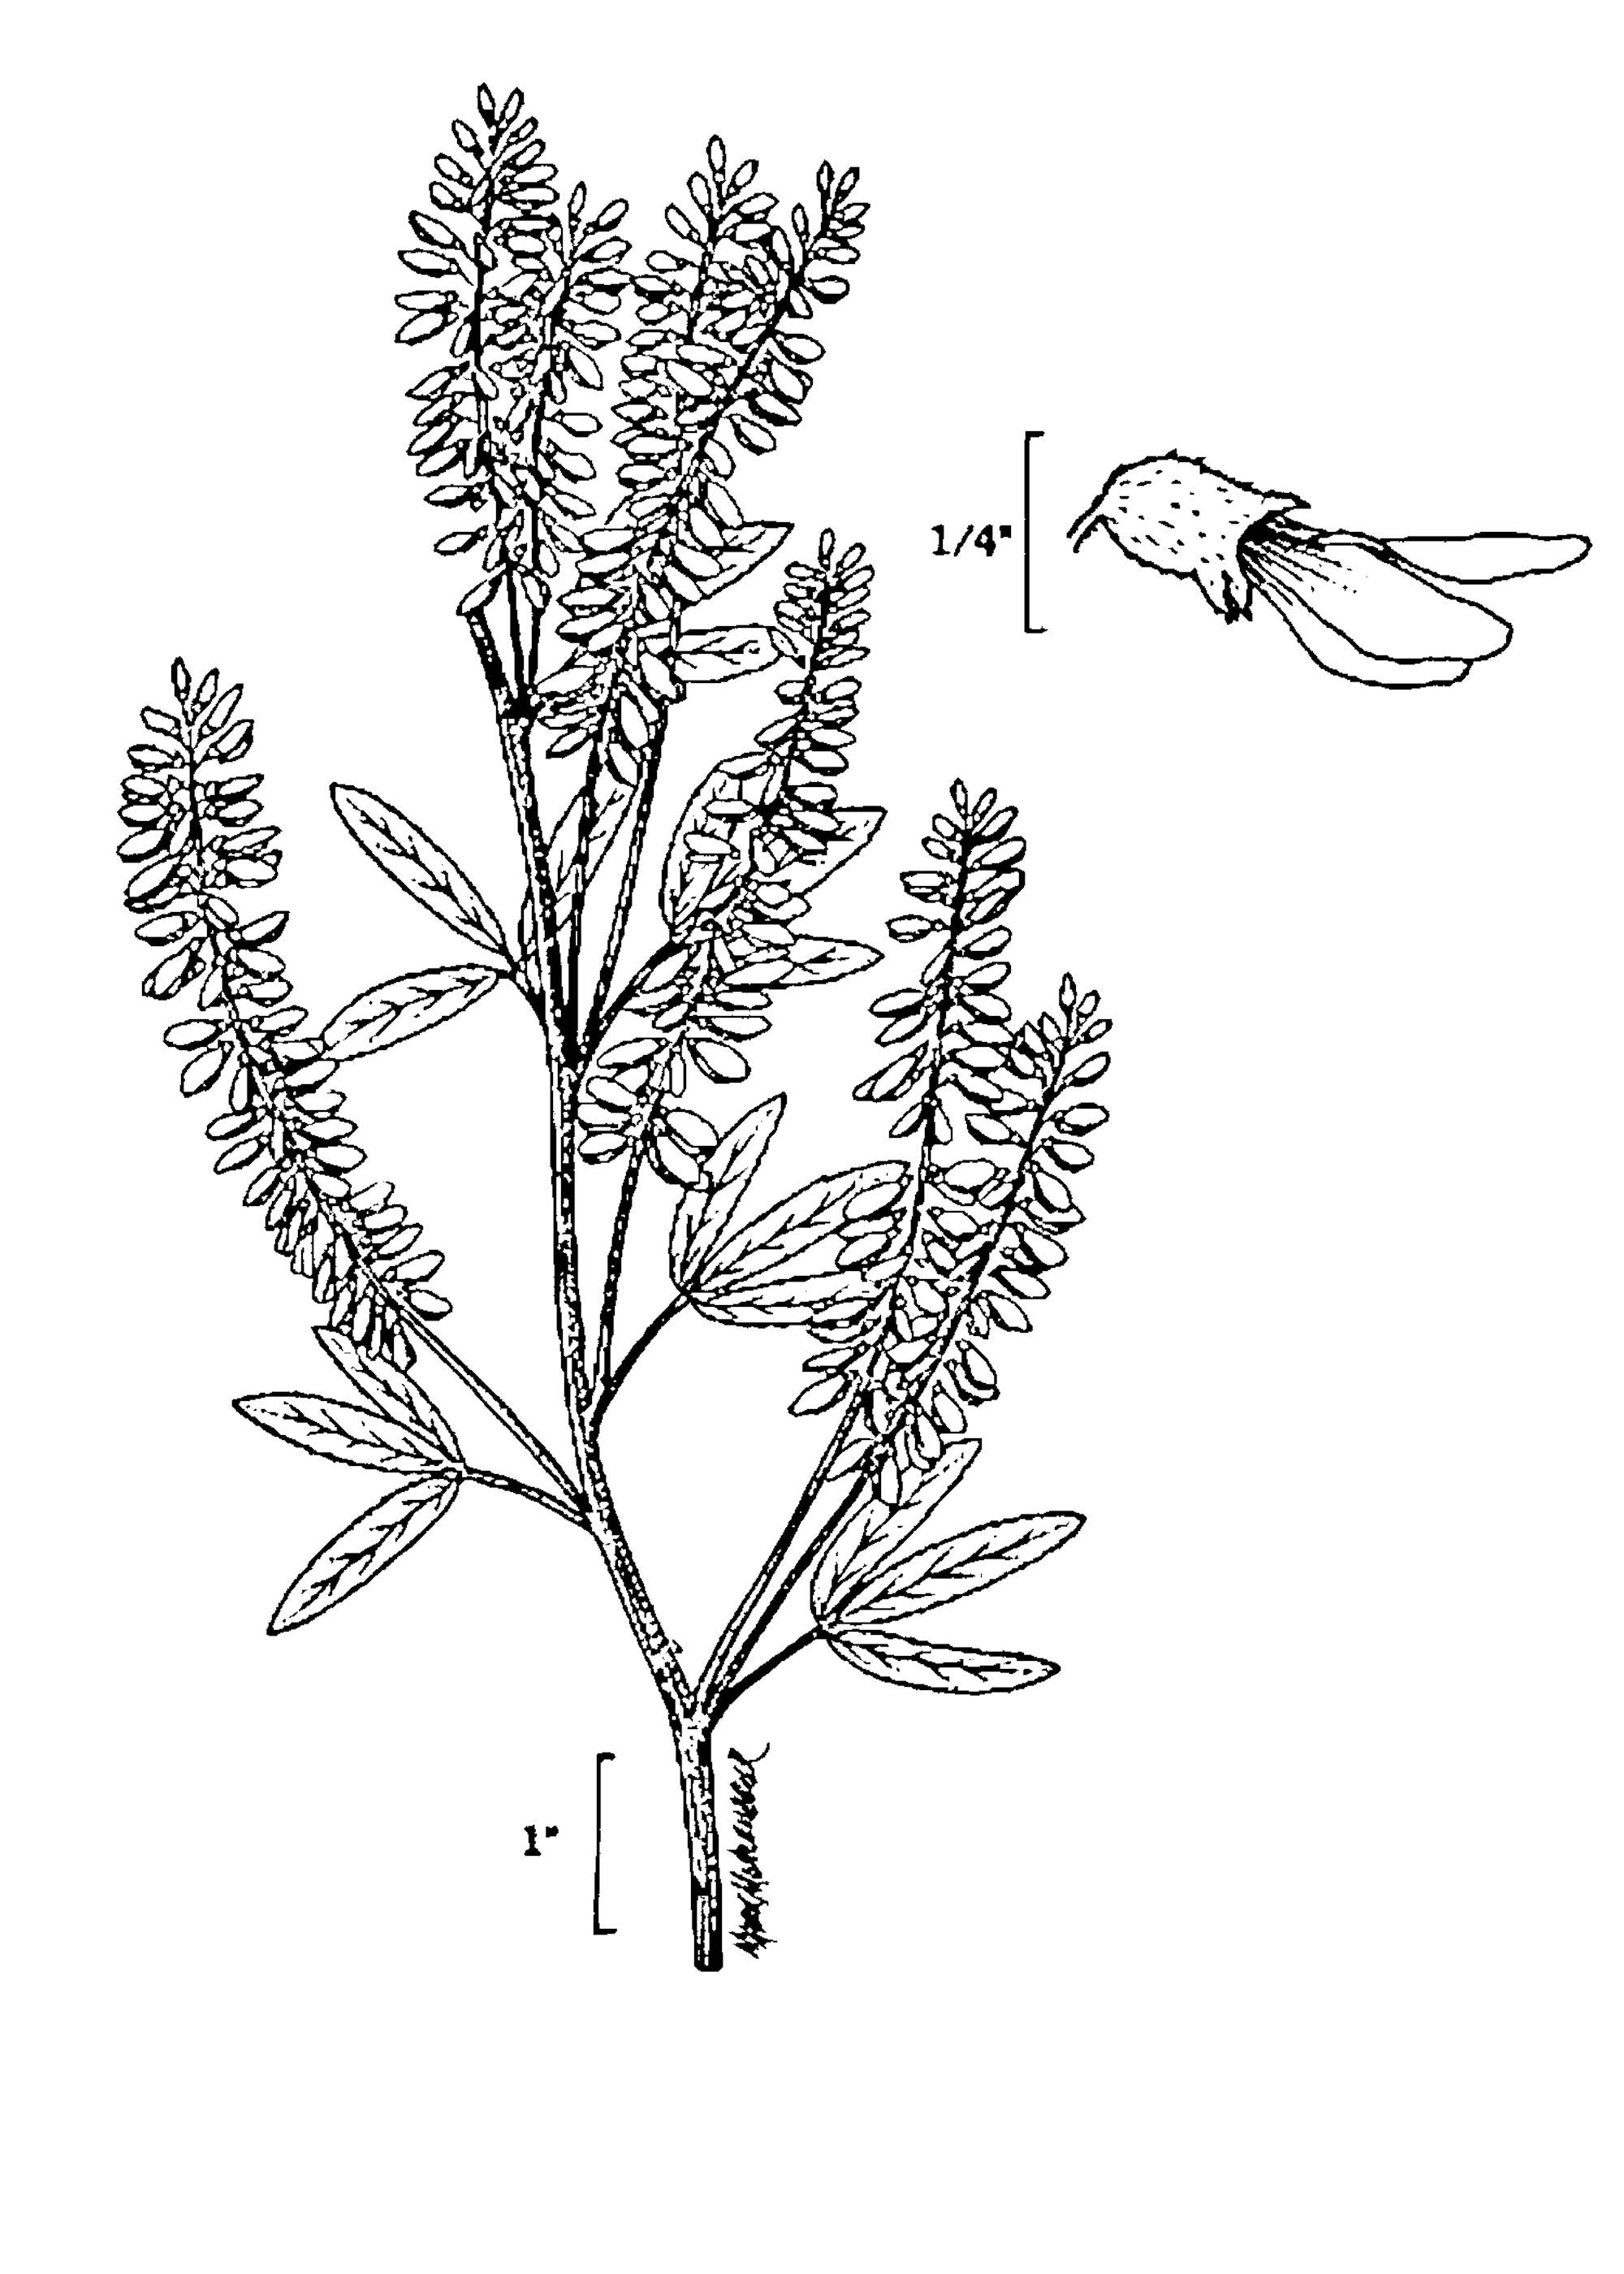 Yellow Sweet Clover line drawing from USDA  NRCS, Wetland flora: Field office illustrated guide to plant species.